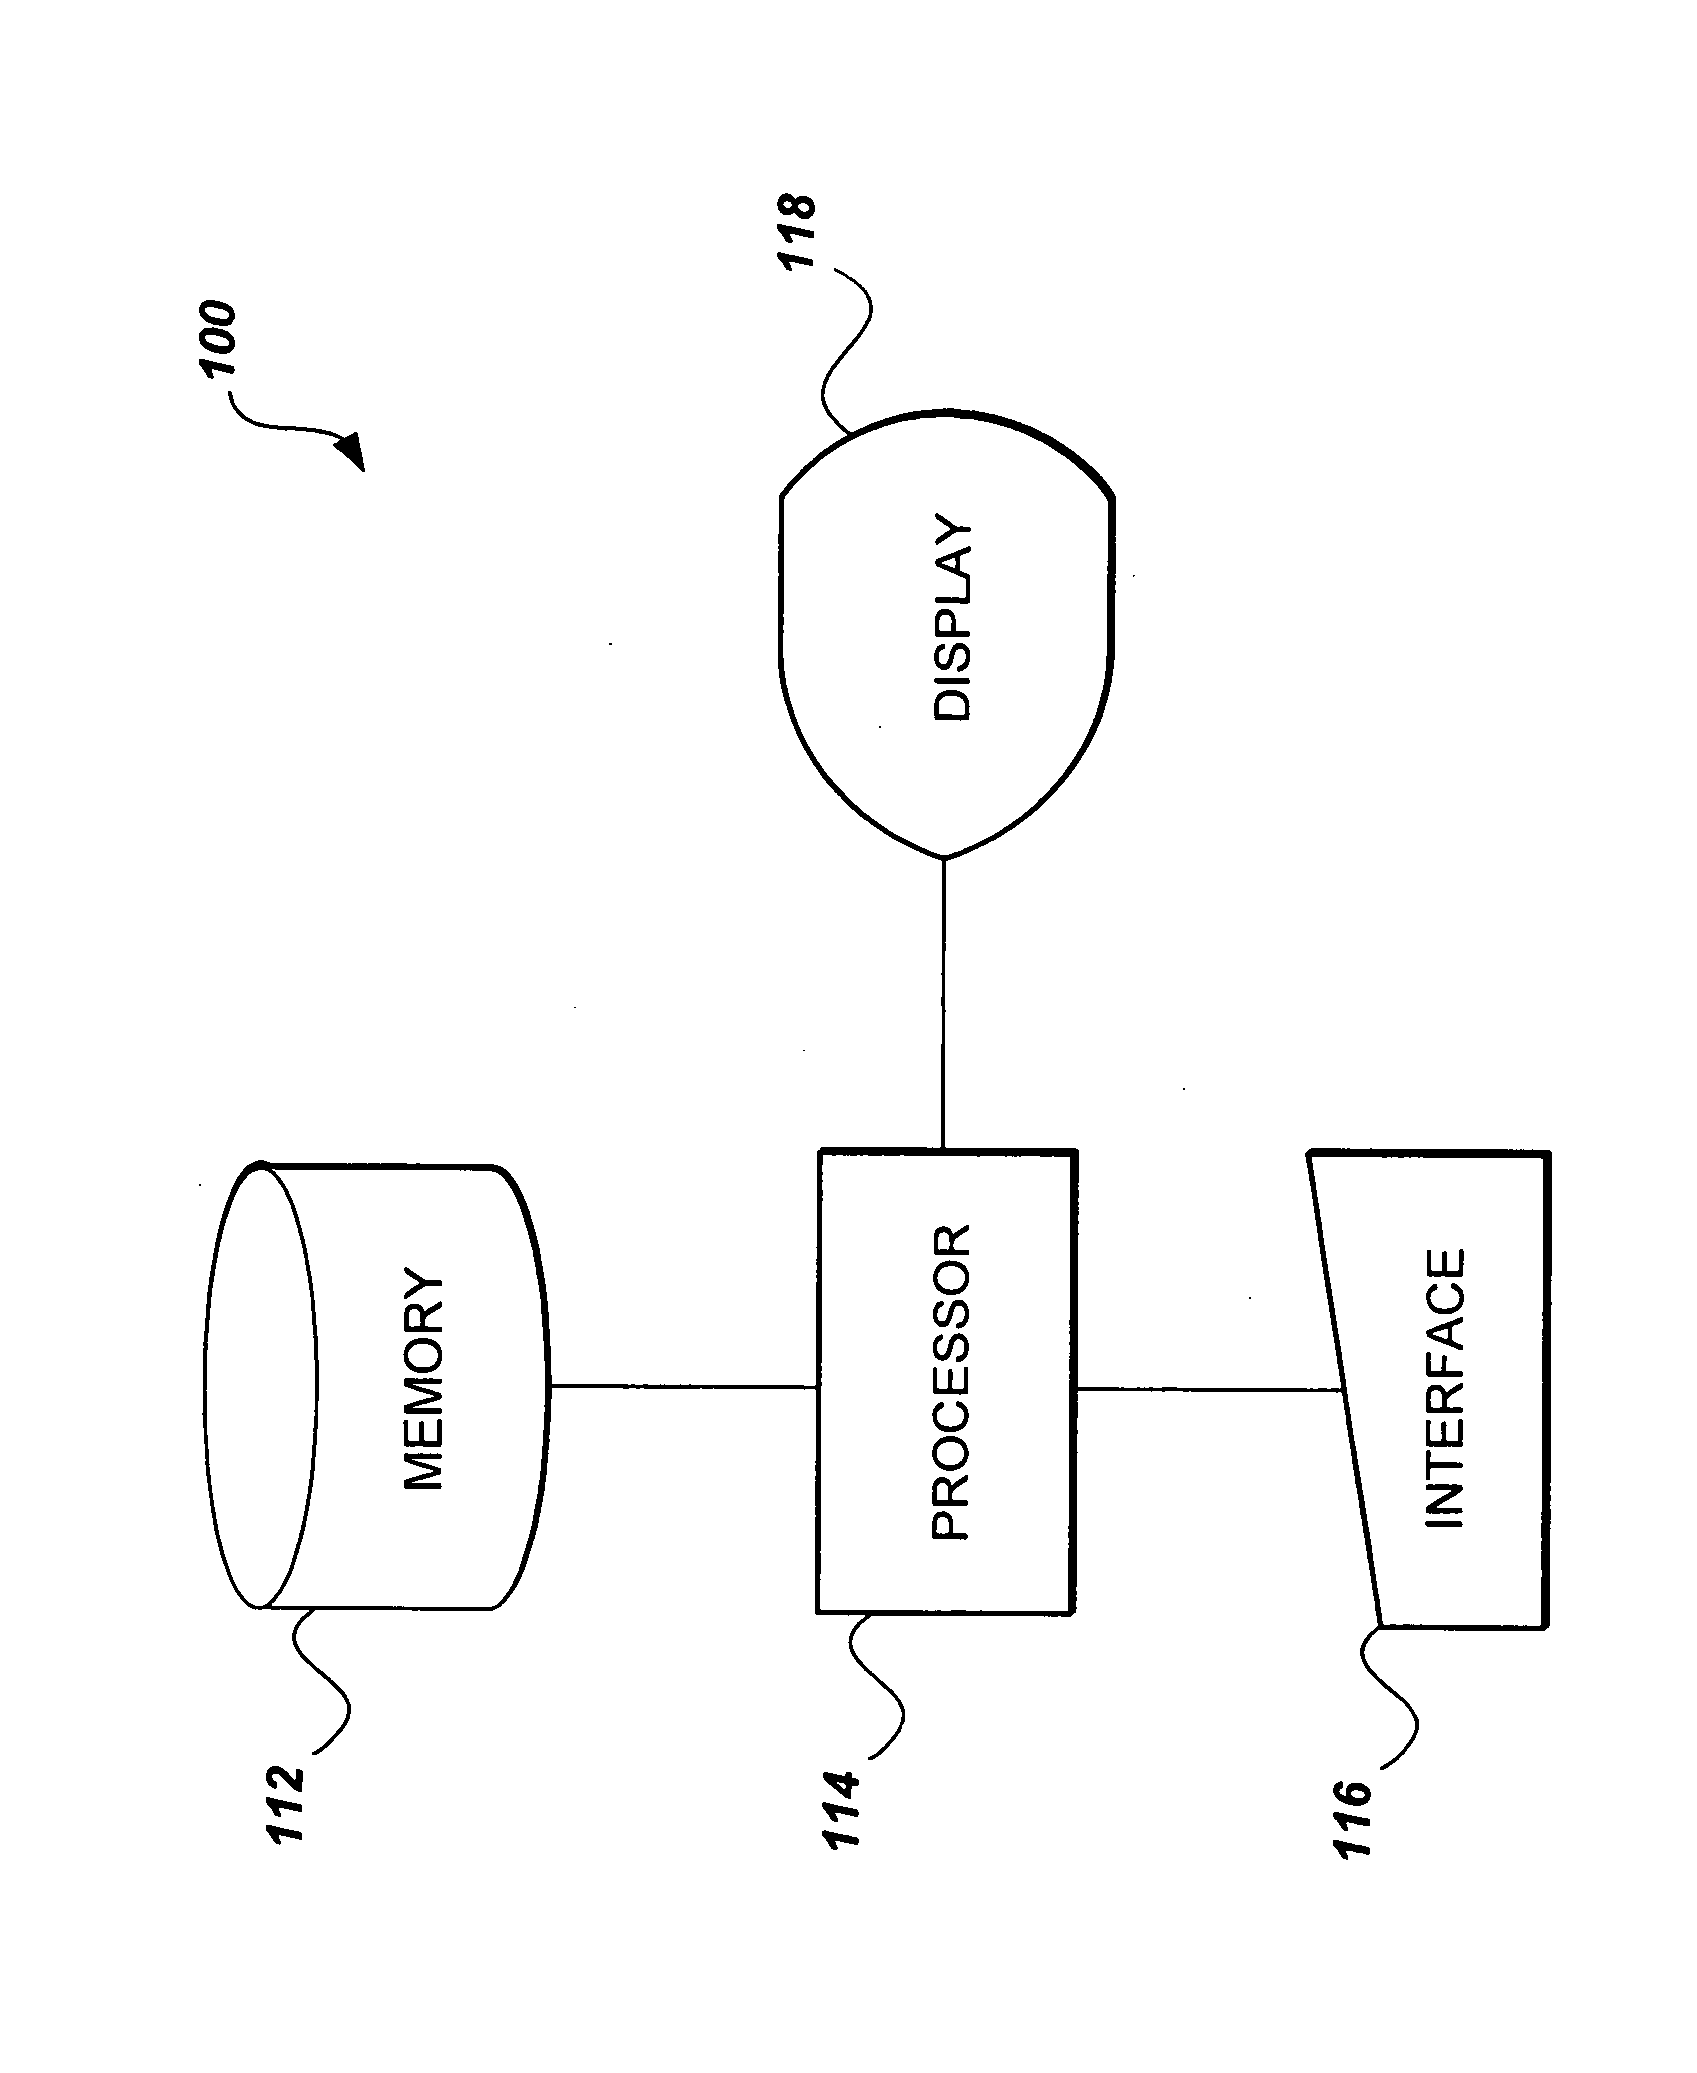 Method of generating a password protocol using elliptic polynomial cryptography